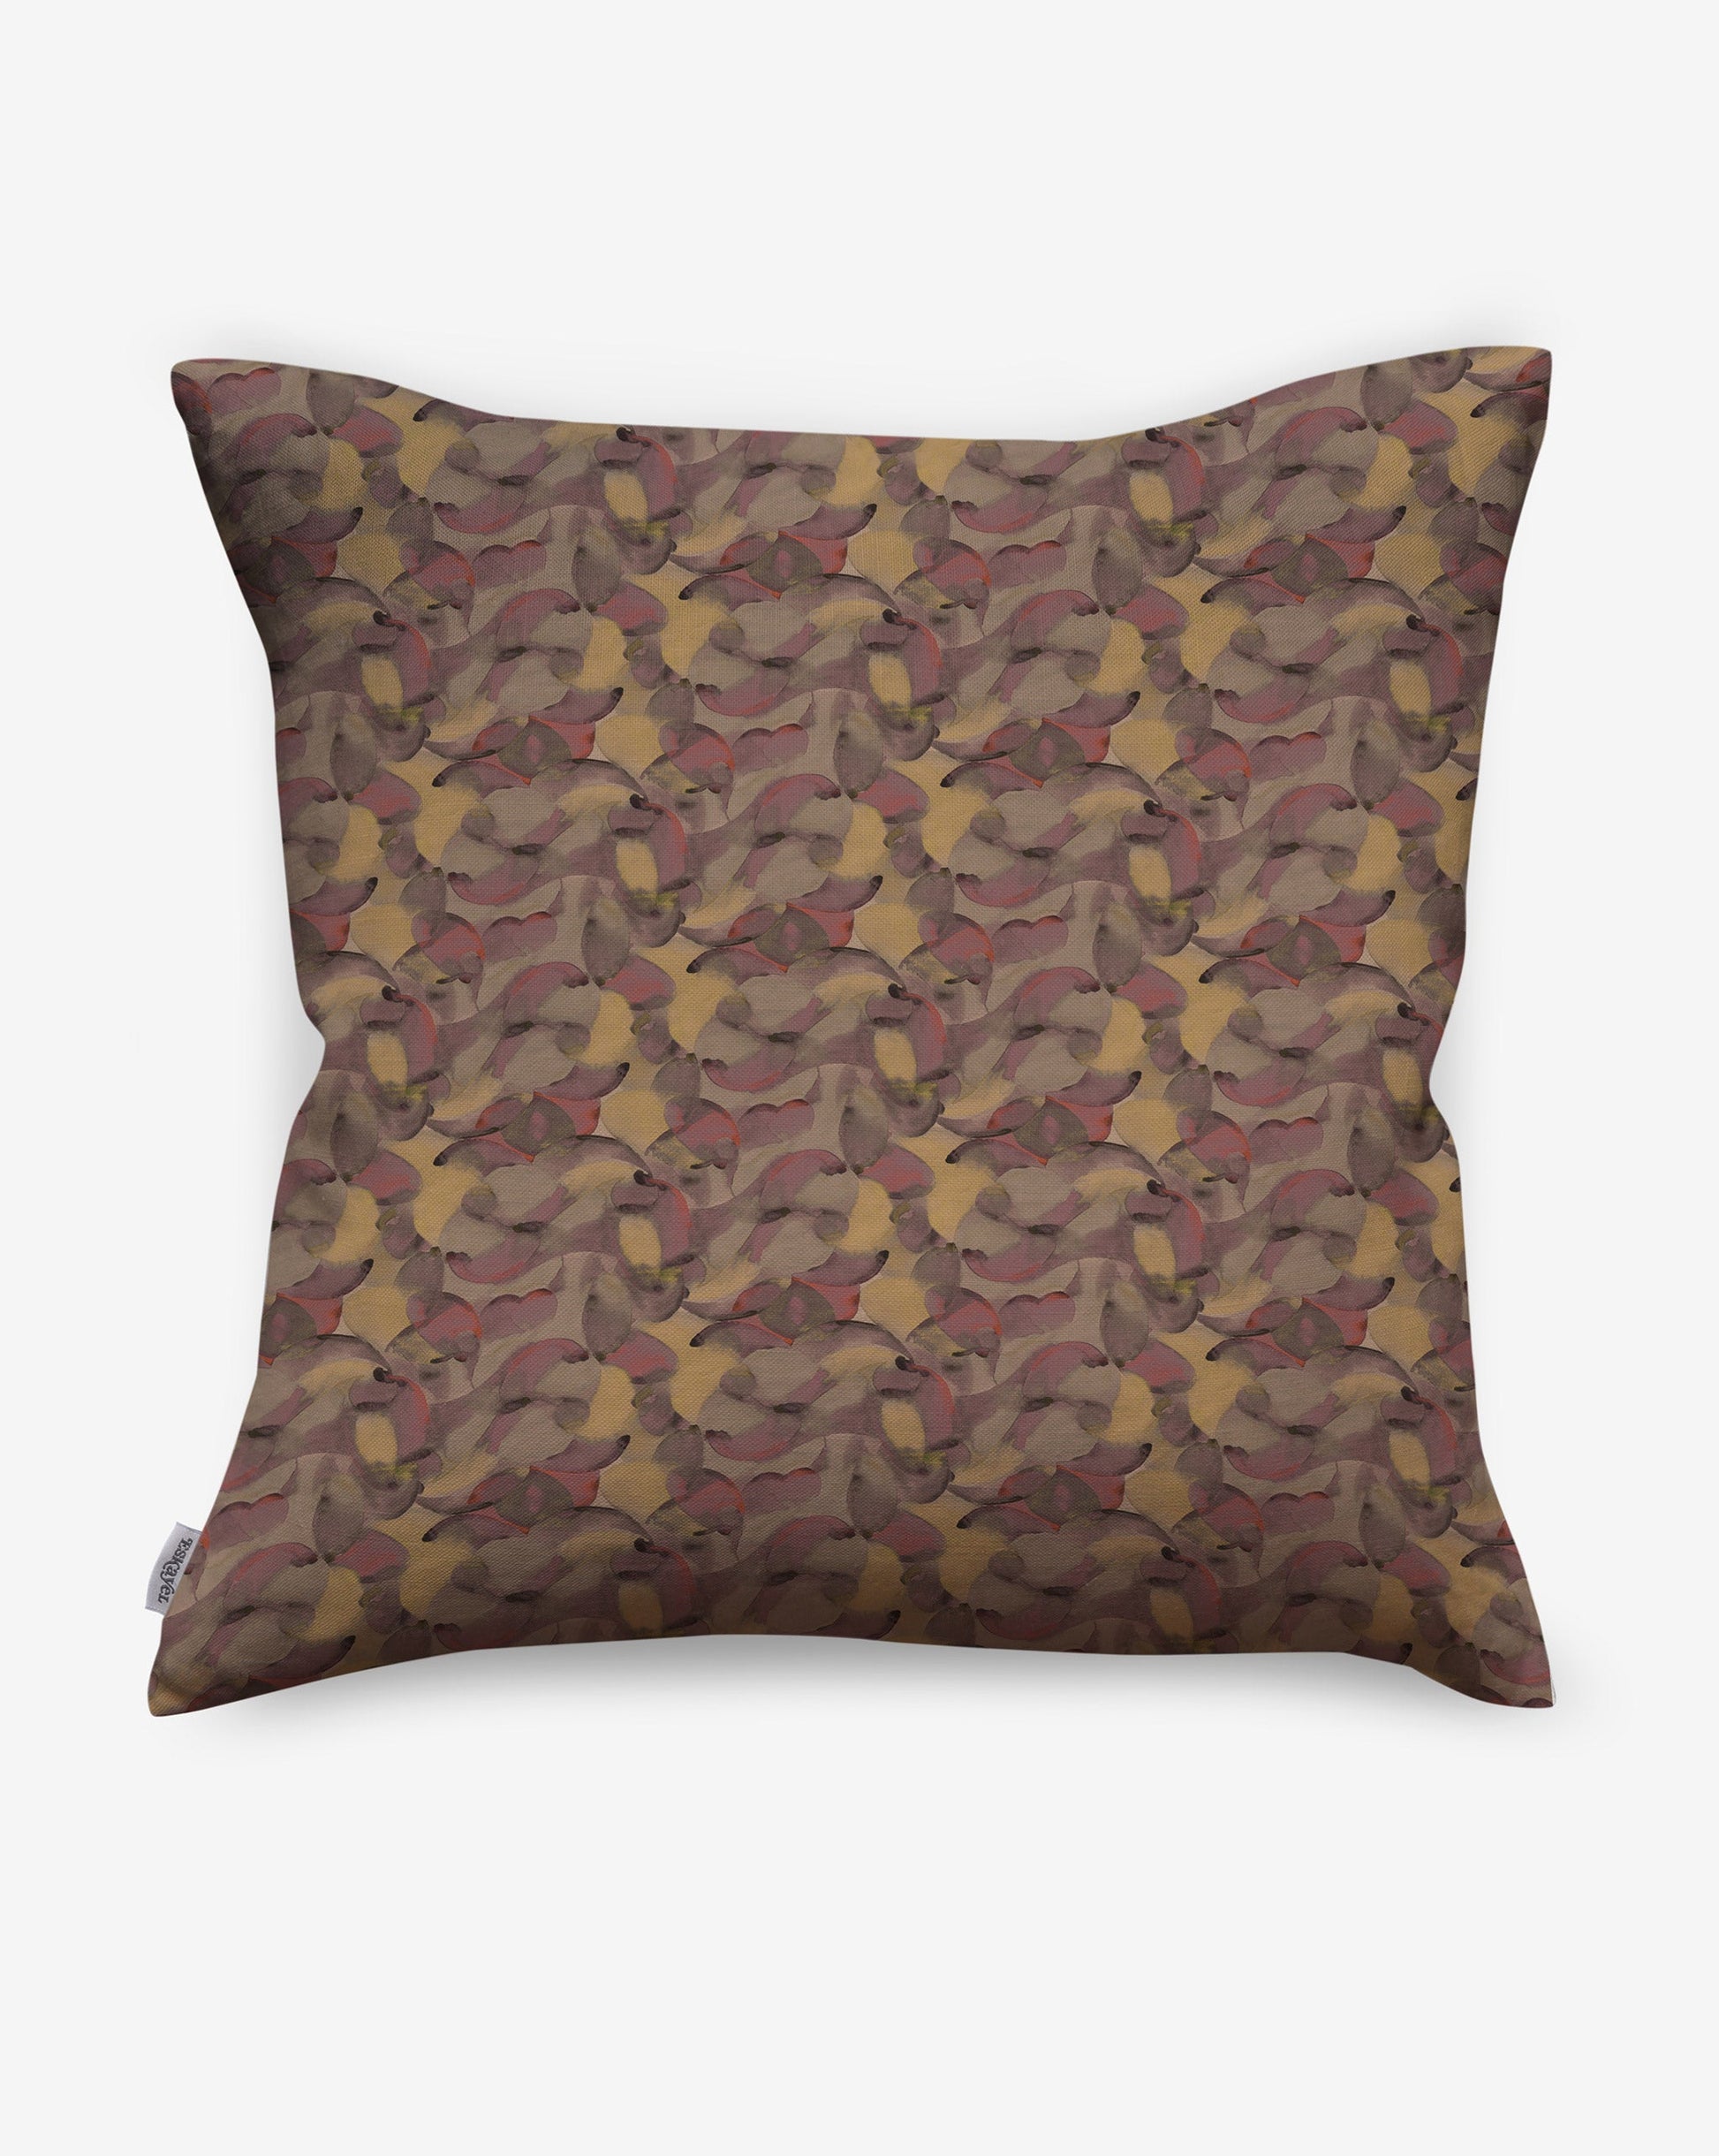 Orbs linen fabric by Eskayel is available as pillows in earthy multicolor Rhubarb.